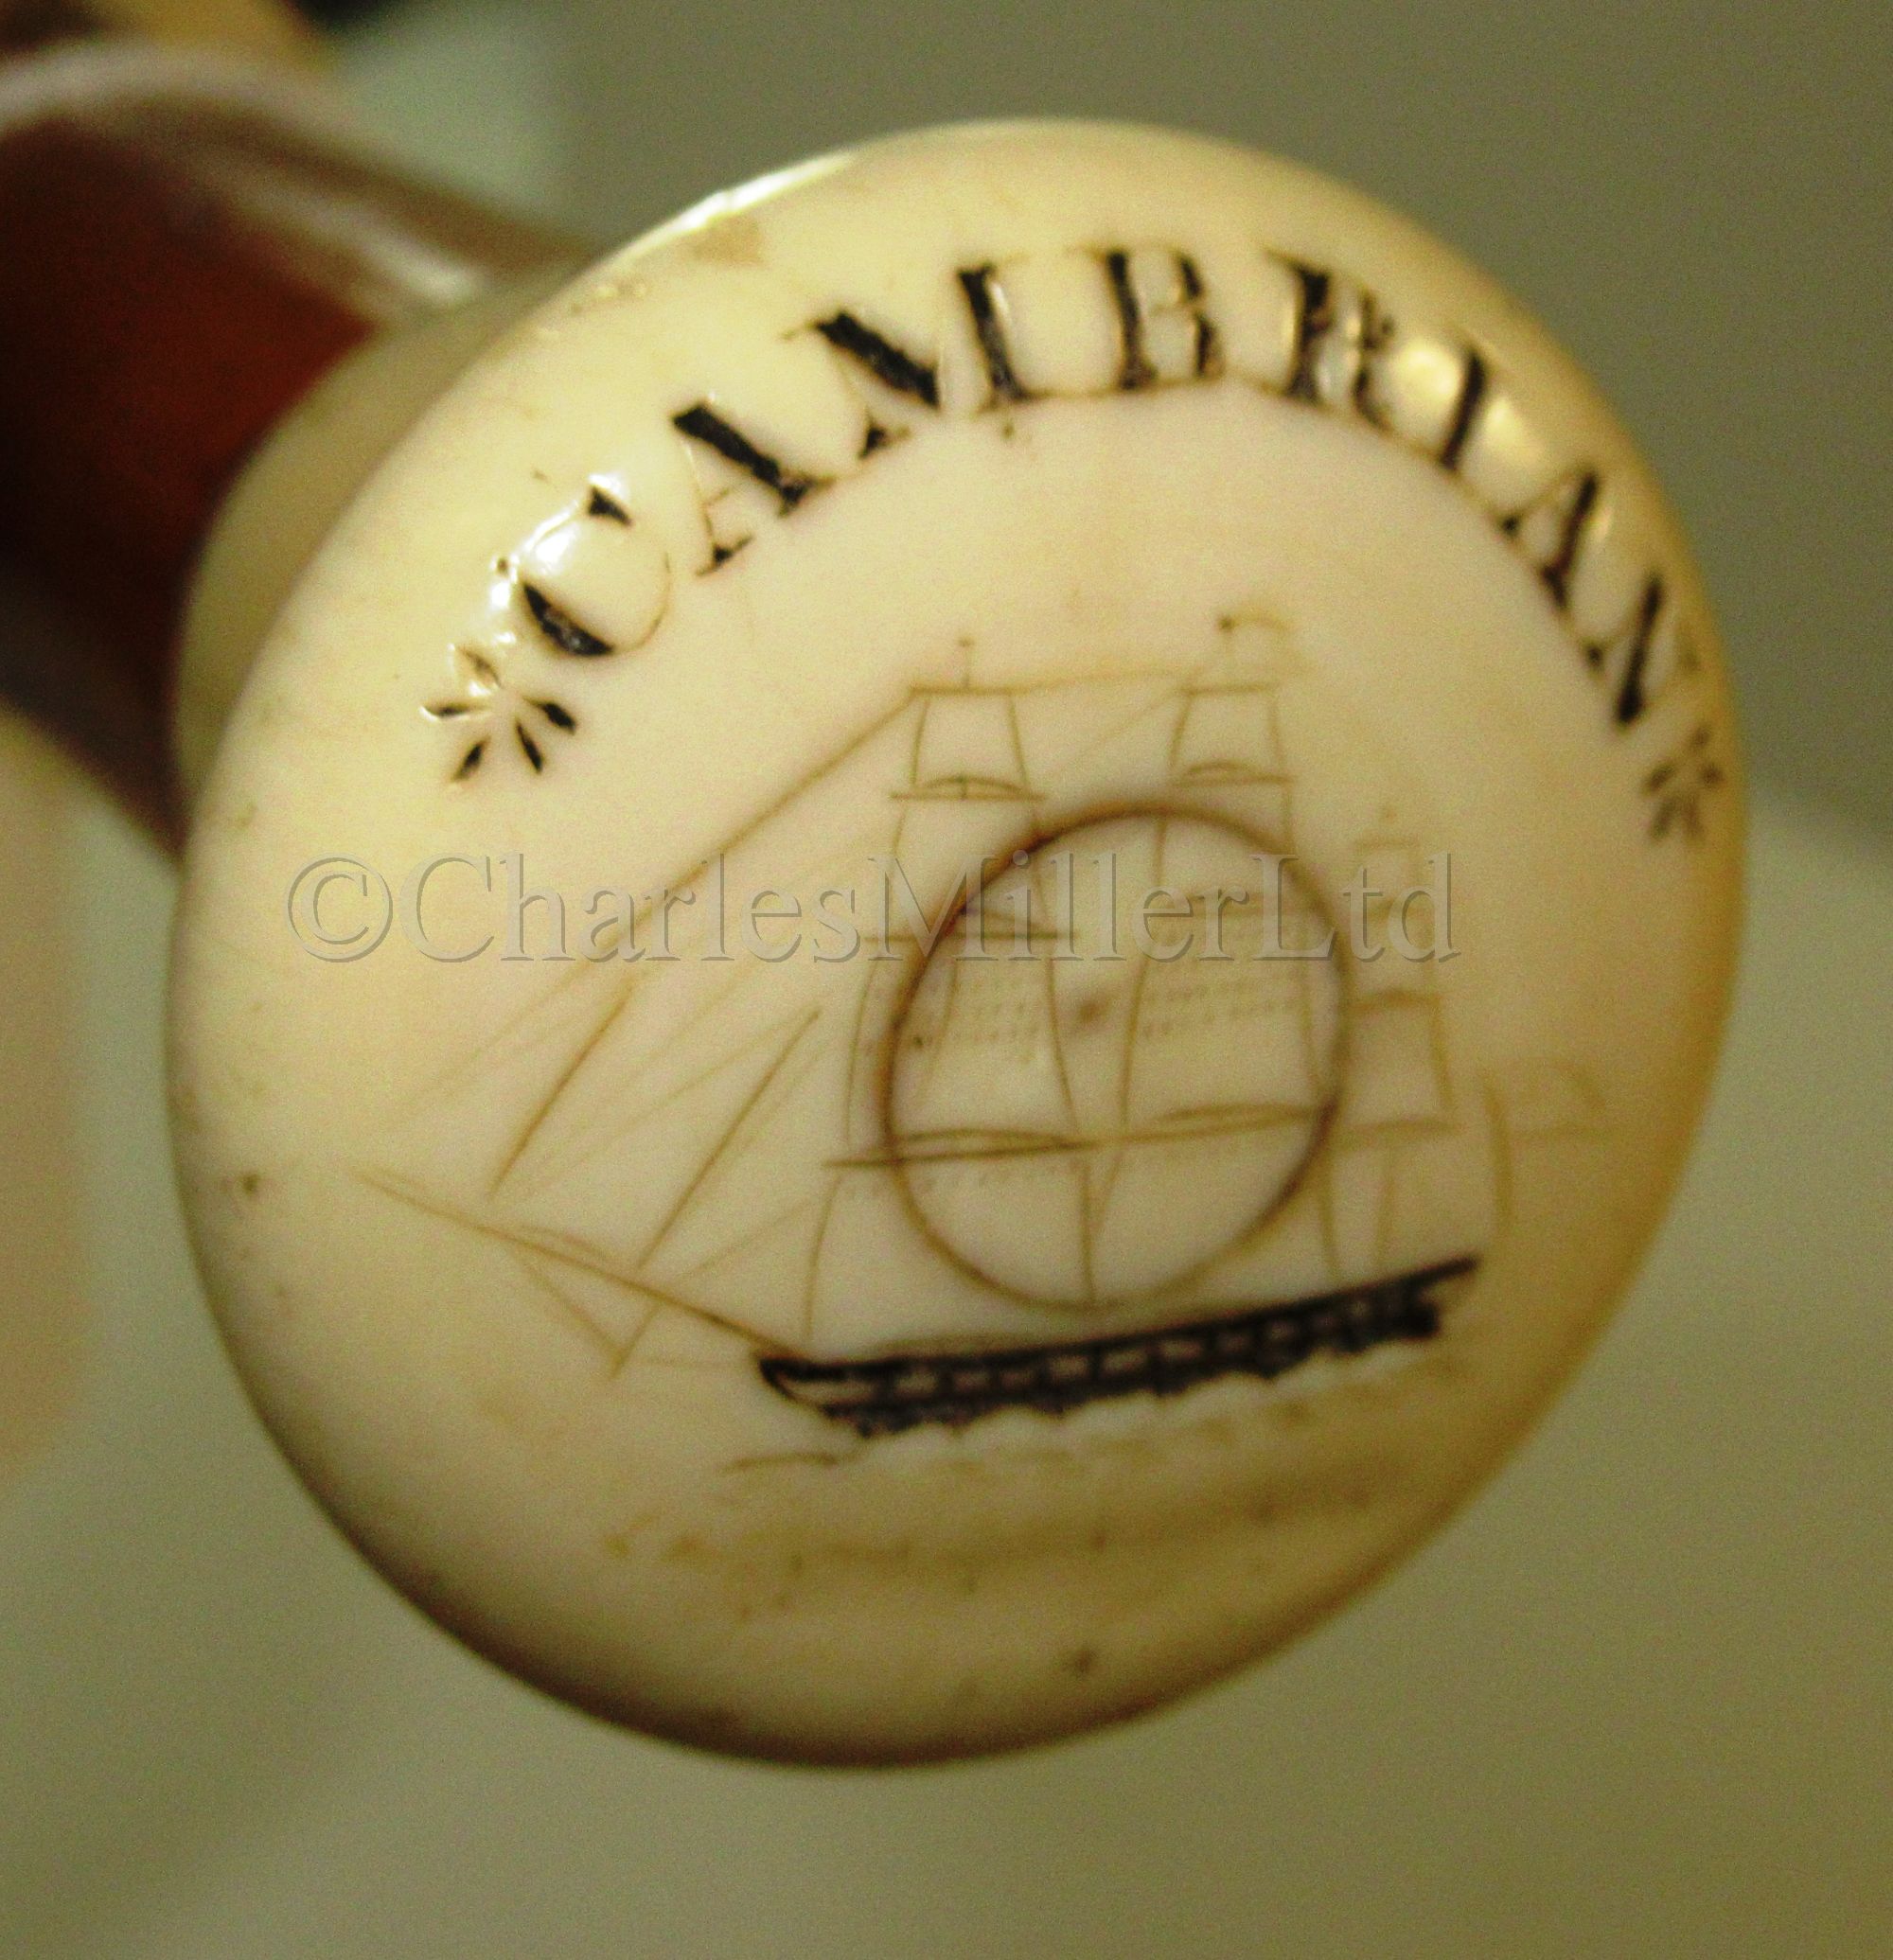 Ø A 19TH CENTURY MALACCA AND MARINE IVORY WALKING STICK COMMEMORATING THE WHALER CAMBRIAN - Image 2 of 4